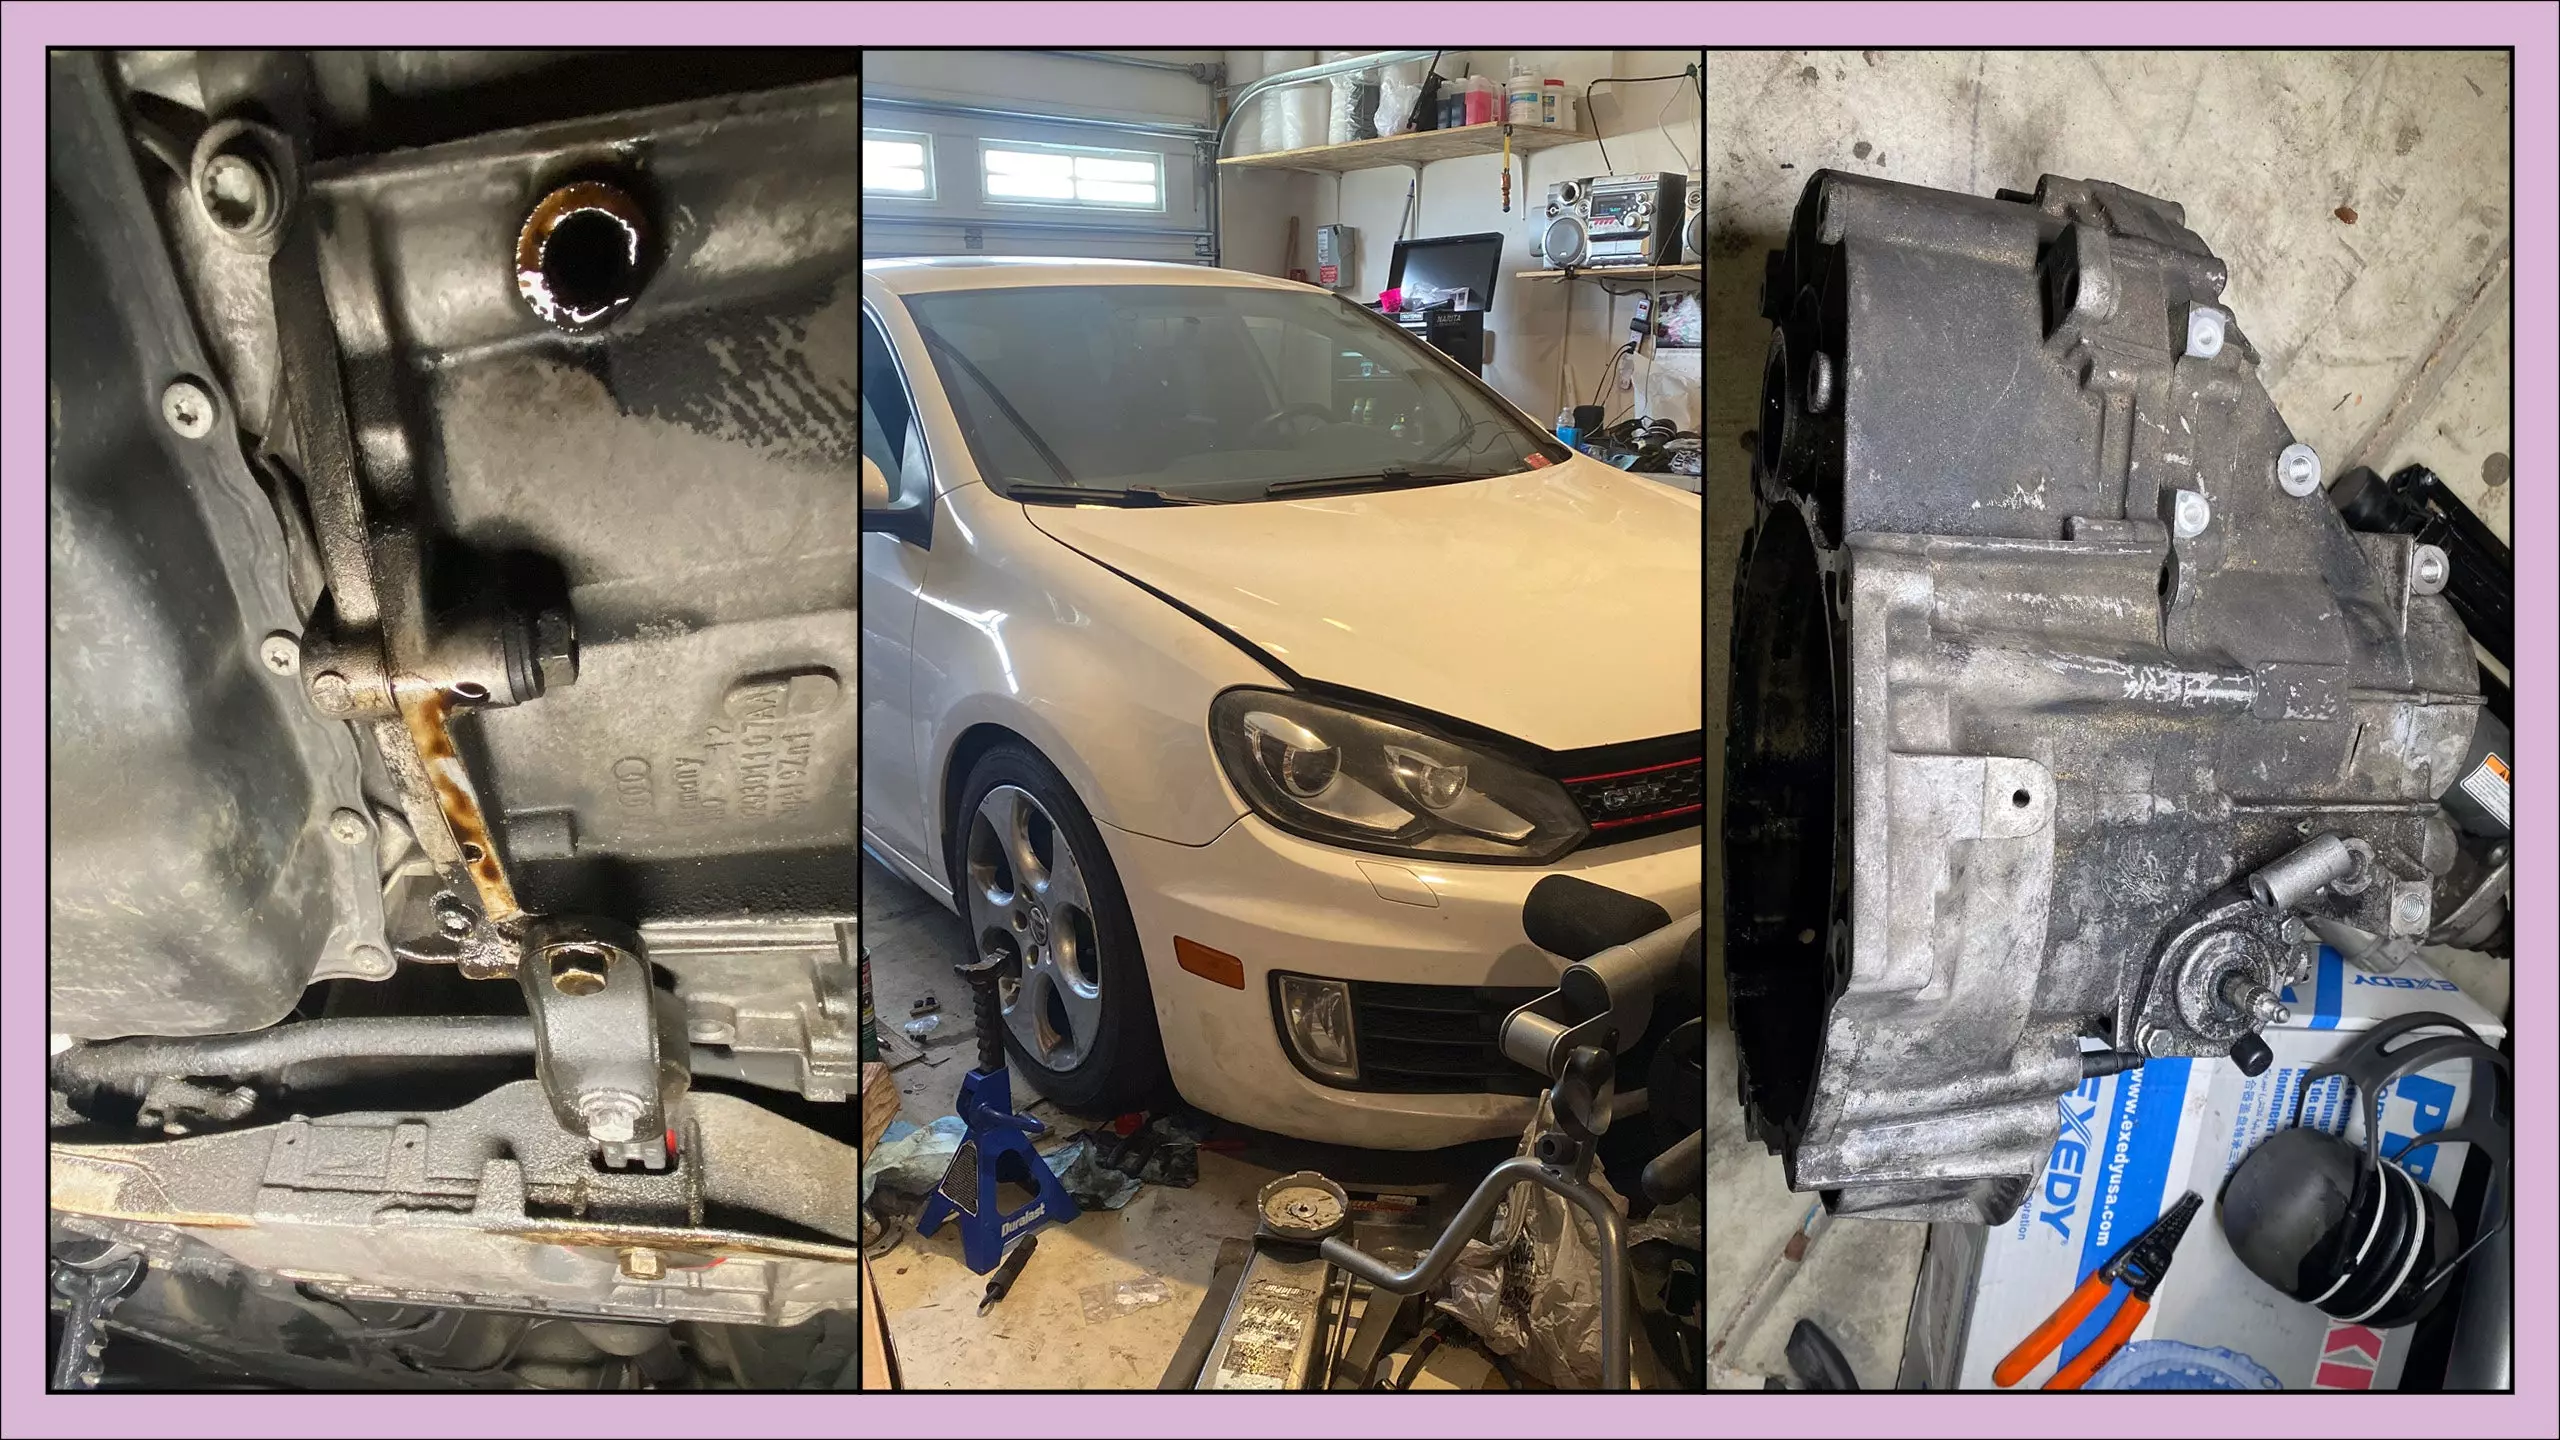 Removing My GTI’s Transmission Wasn’t So Bad but Ghosts of a Previous Owner’s Bad Work Haunted Me | Autance